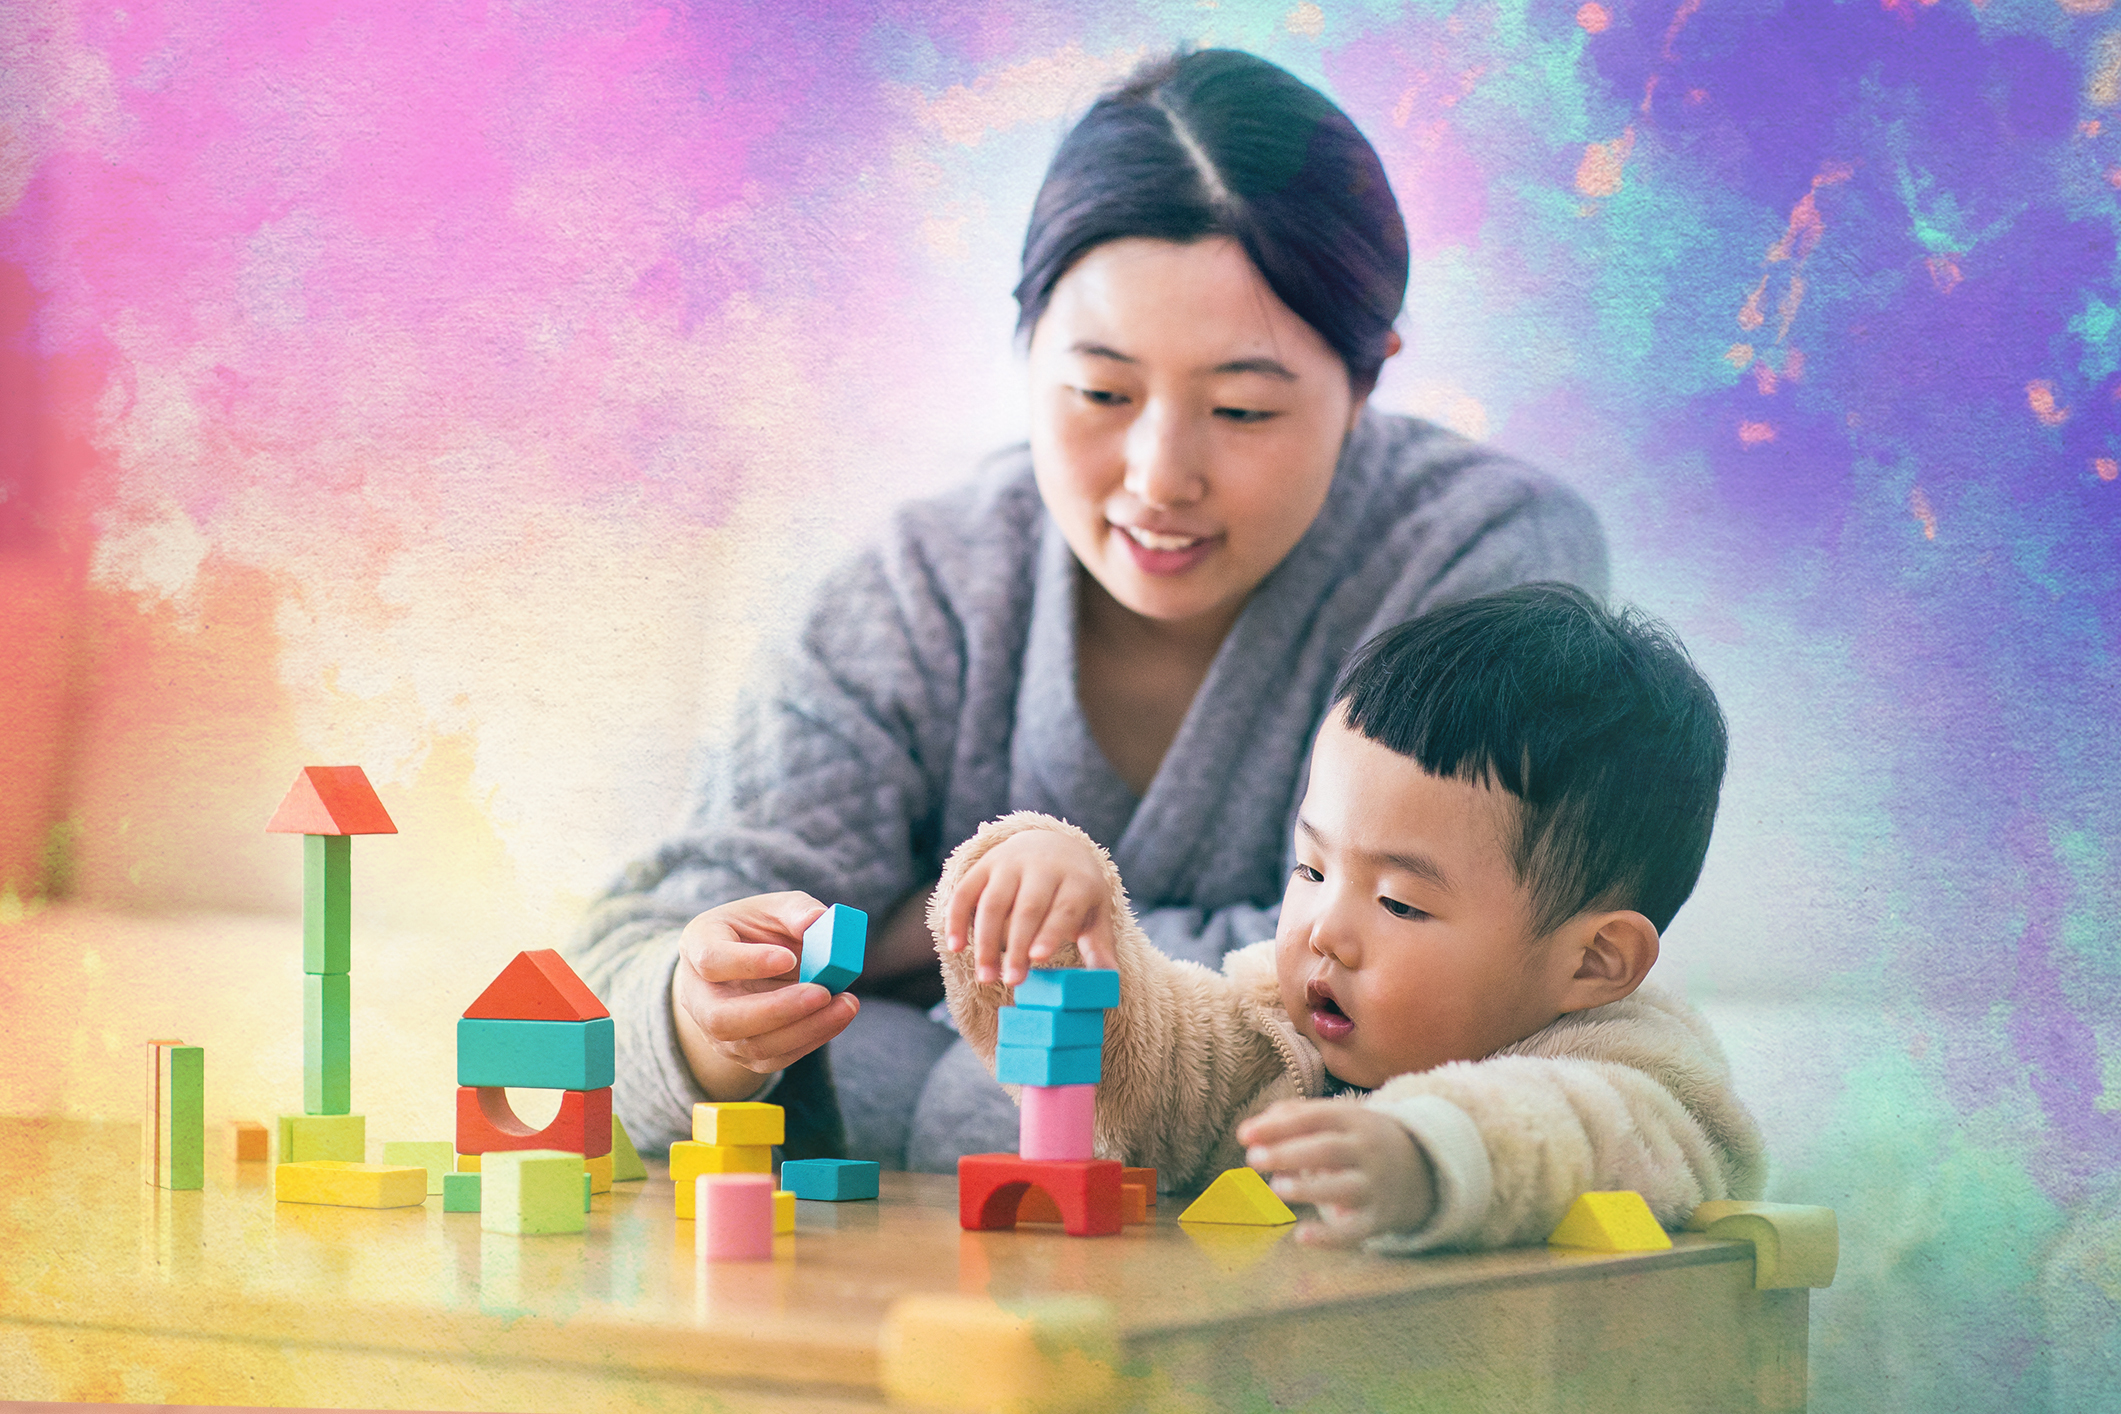 A parent playing with blocks with their child